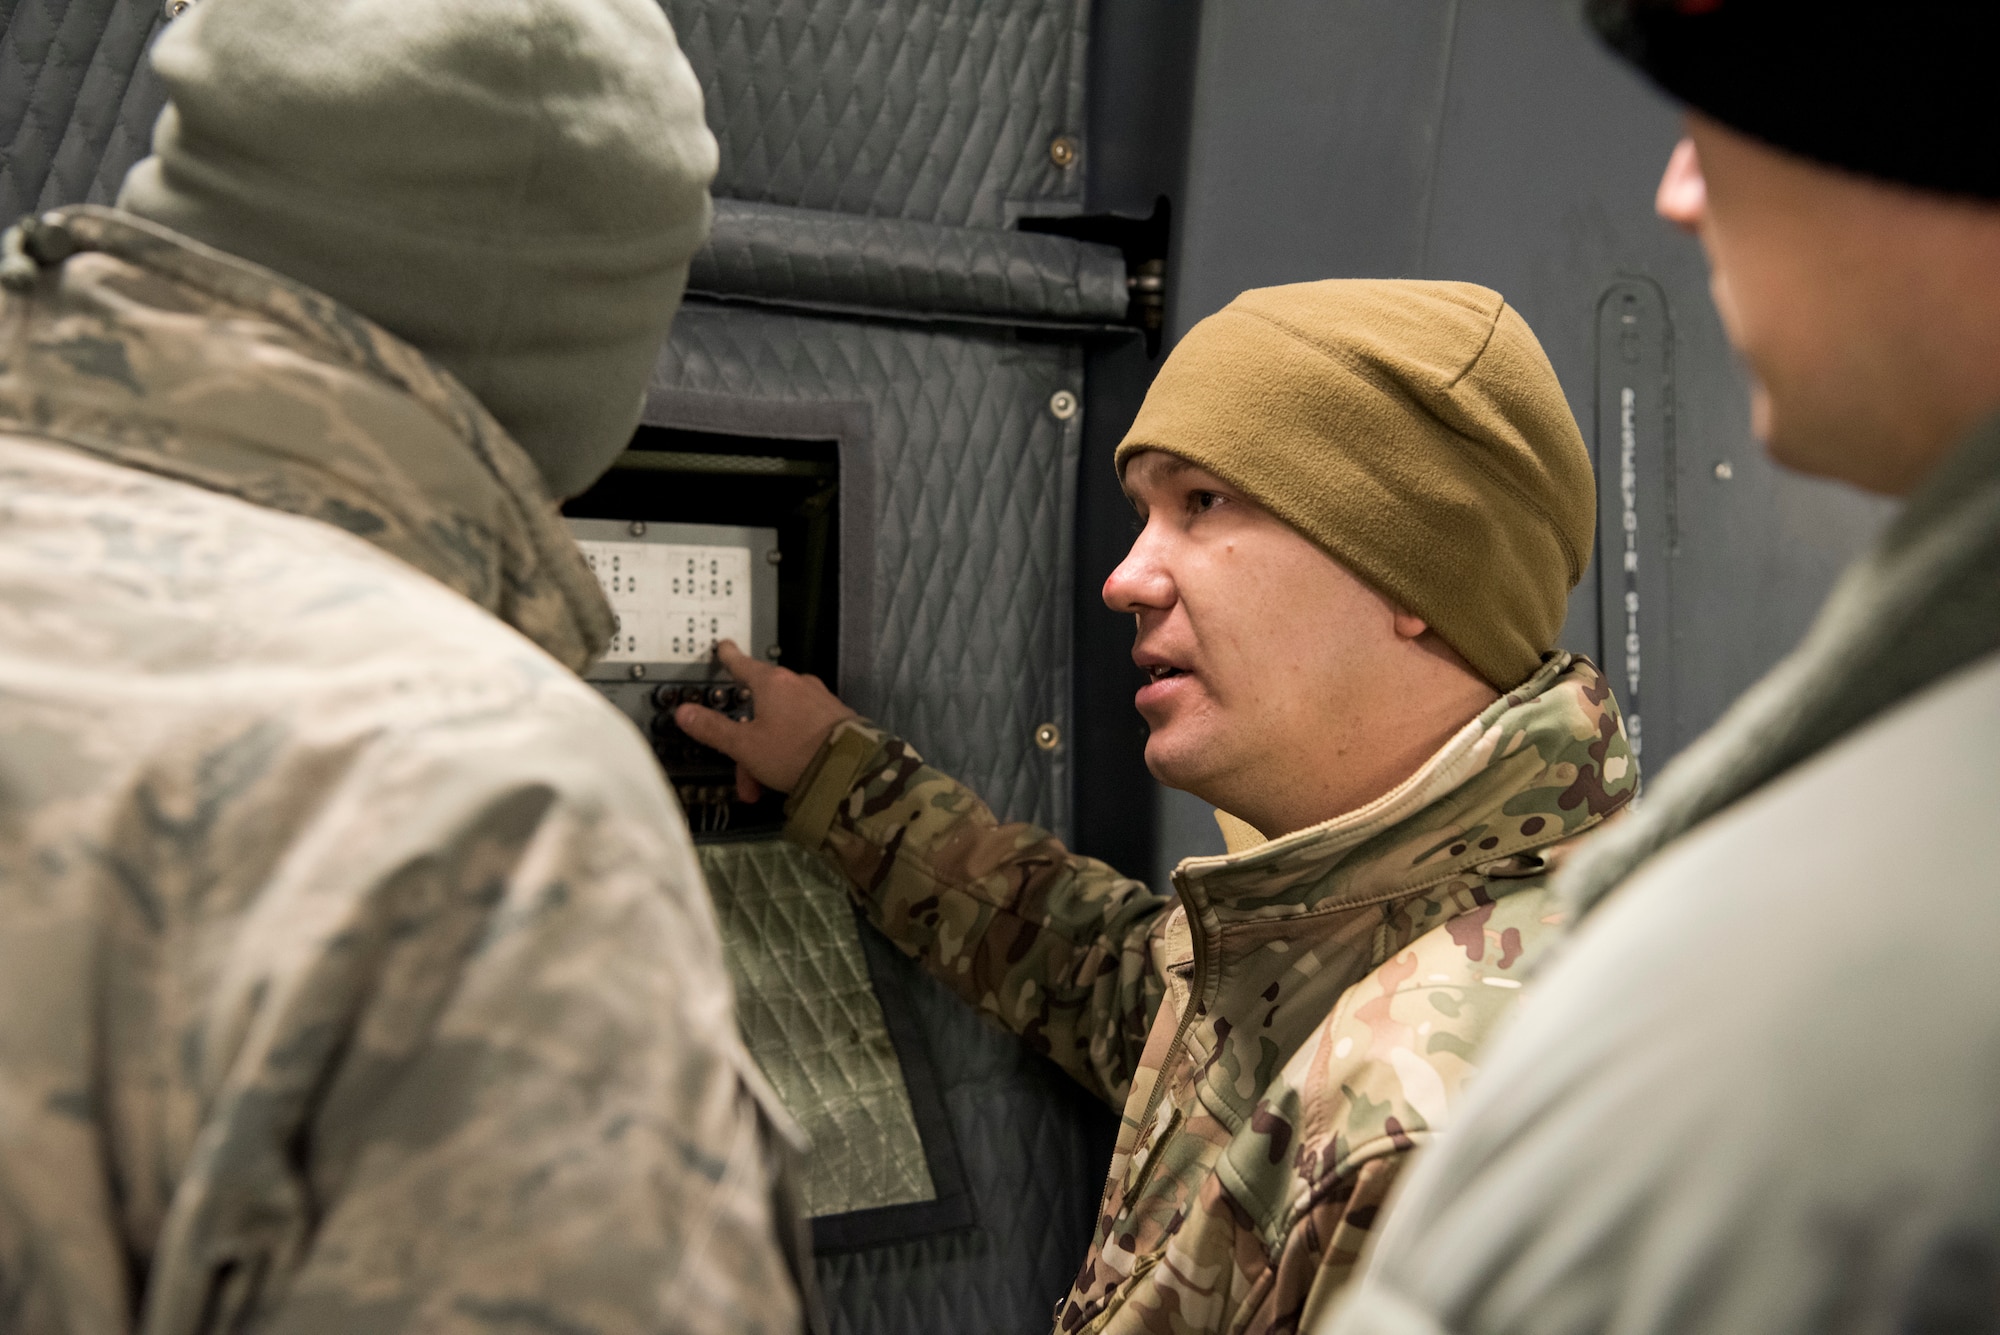 Staff Sgt. Brett Anger, 521st Air Mobility Operations Wing regional training center electrical environmental systems instructor, explains the anti-skid test controller to students aboard a C-5M Super Galaxy aircraft at Ramstein Air Base, Germany, Nov. 29, 2018. Nearly 60 aircraft maintainers and 30 aerial port personnel trained on the aircraft, assigned to the 436th Airlift Wing in Dover, Del., during a first-of-its-kind training session held Nov. 26 – Dec. 7. (U.S. Air Force photo by Staff Sgt. Aaron J. Jenne)